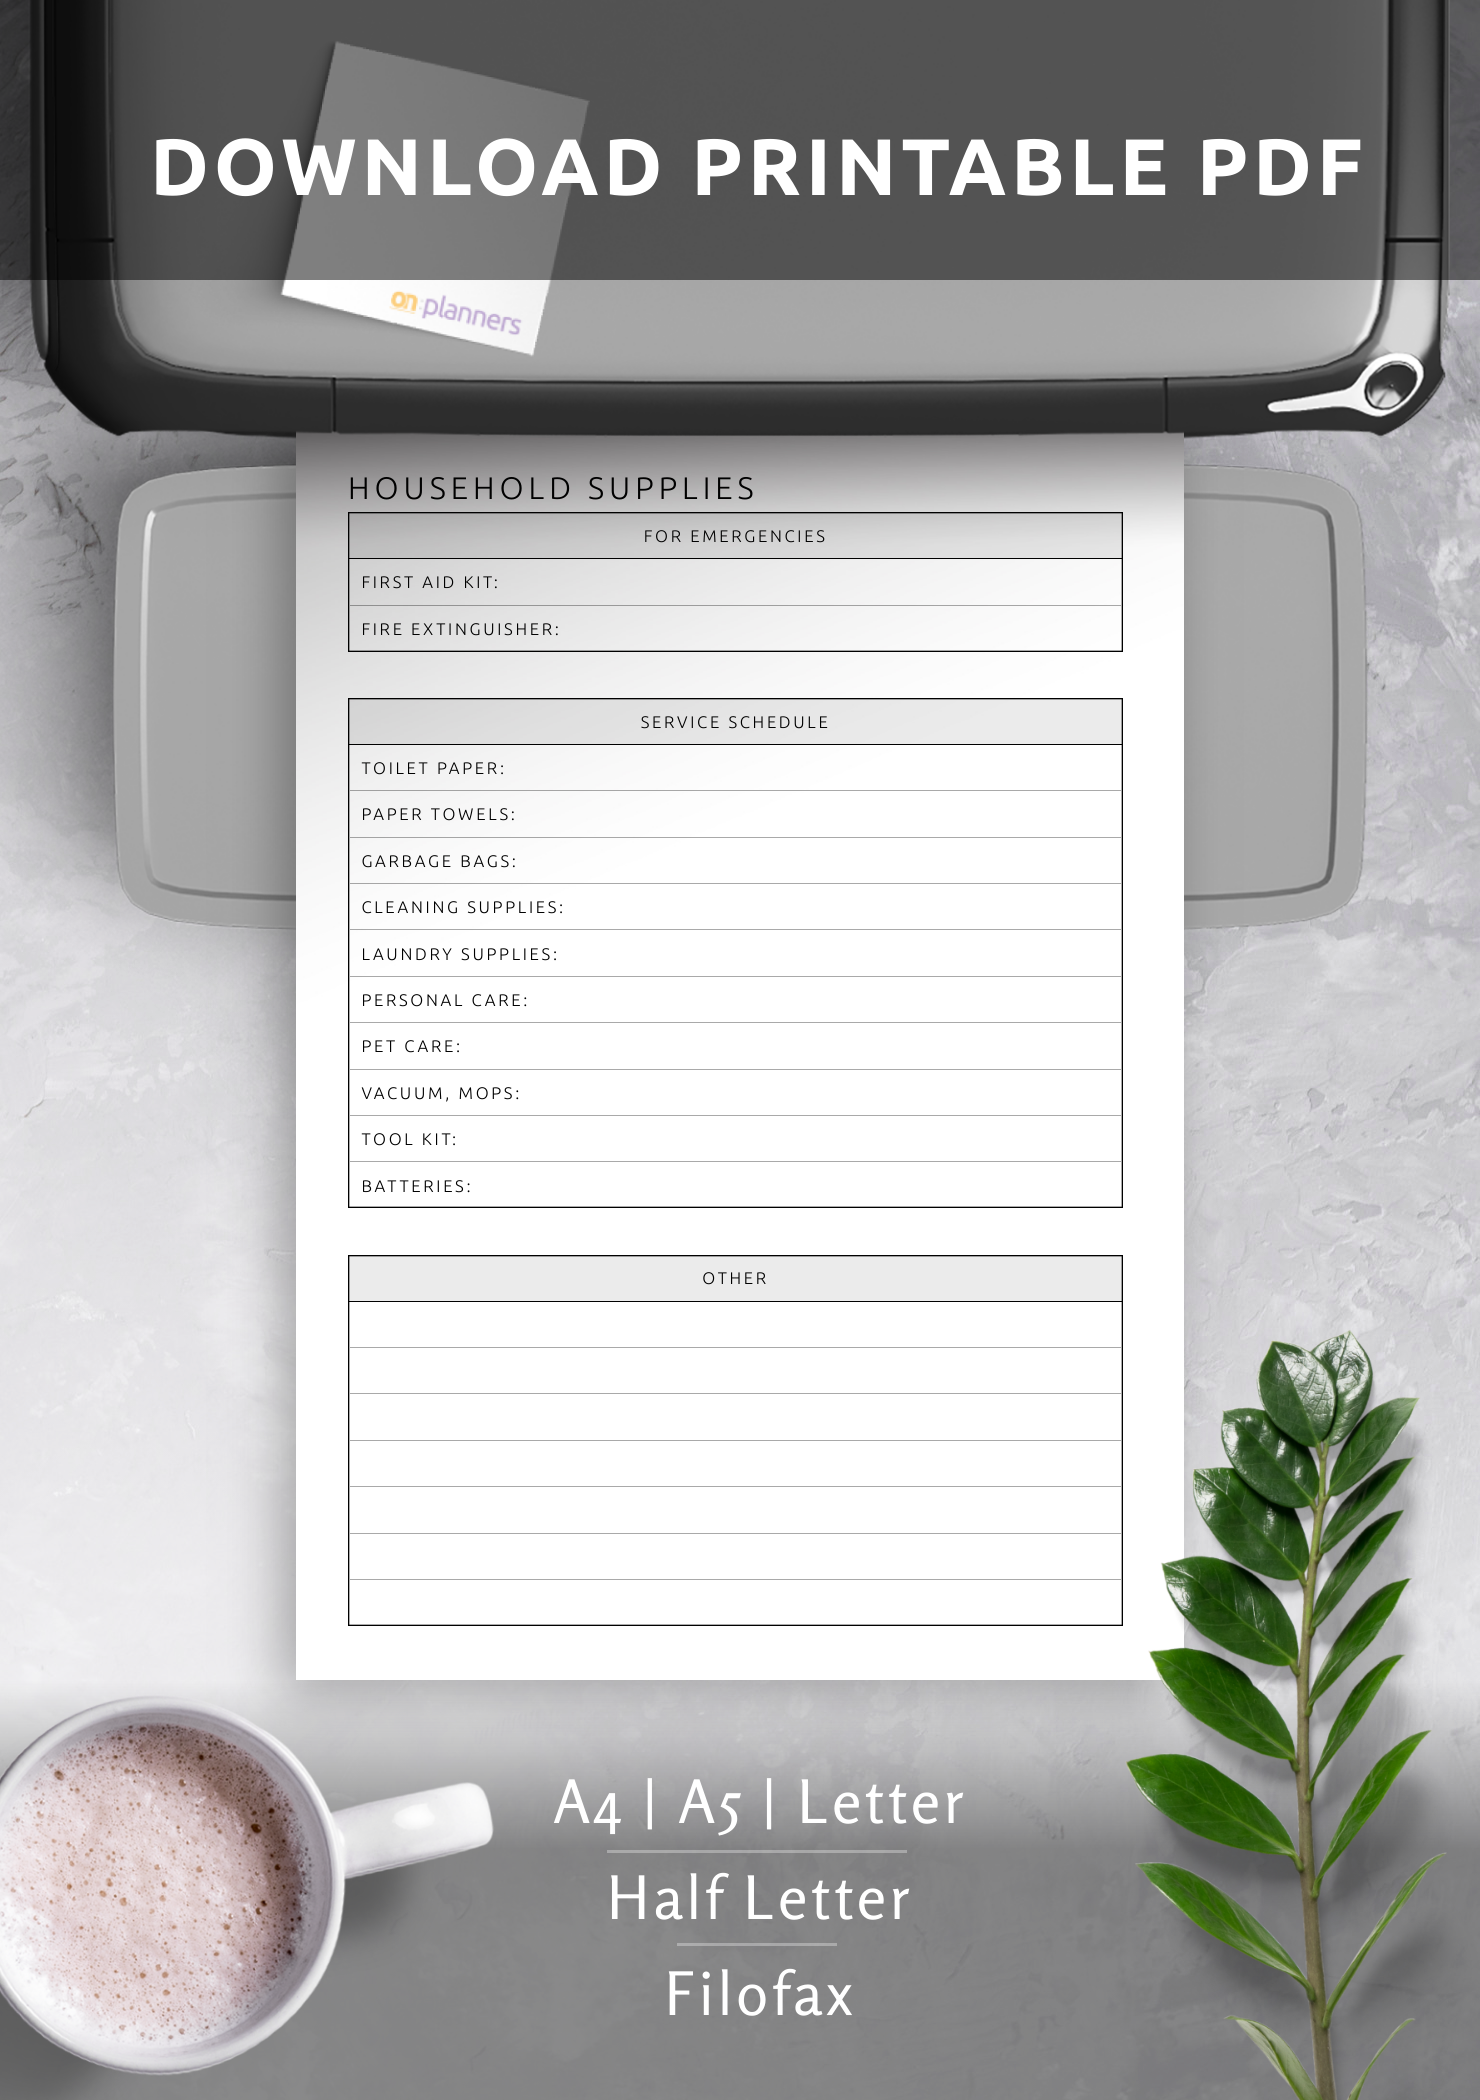 https://onplanners.com/sites/default/files/styles/template_fancy/public/template-images/printable-household-supplies-template-template1.png